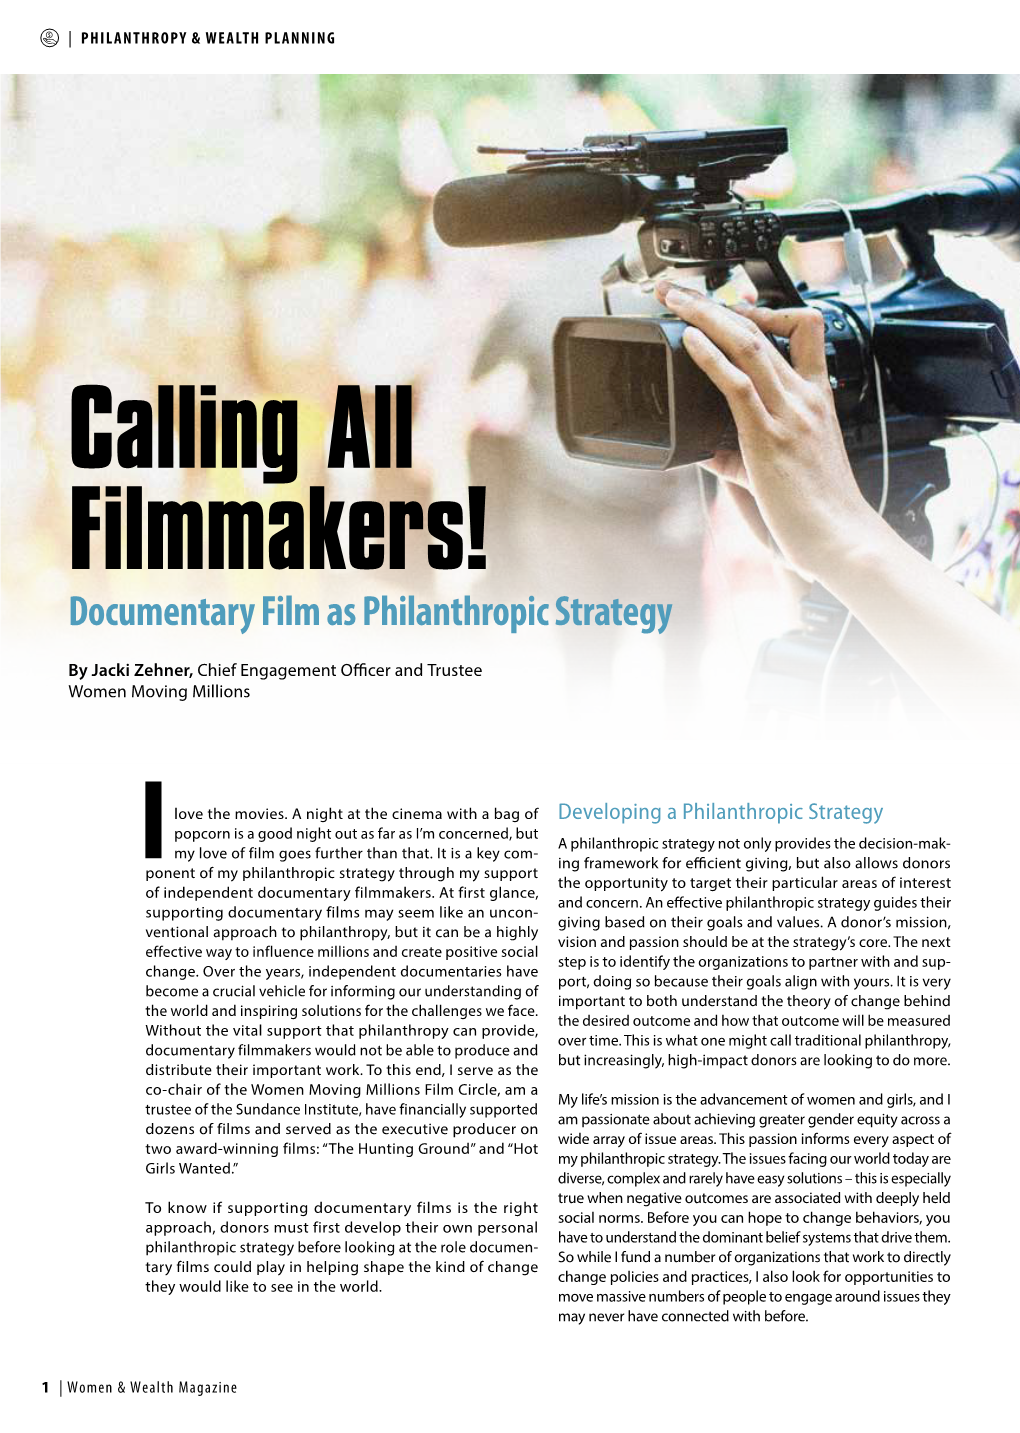 Calling All Filmmakers! Documentary Film As Philanthropic Strategy